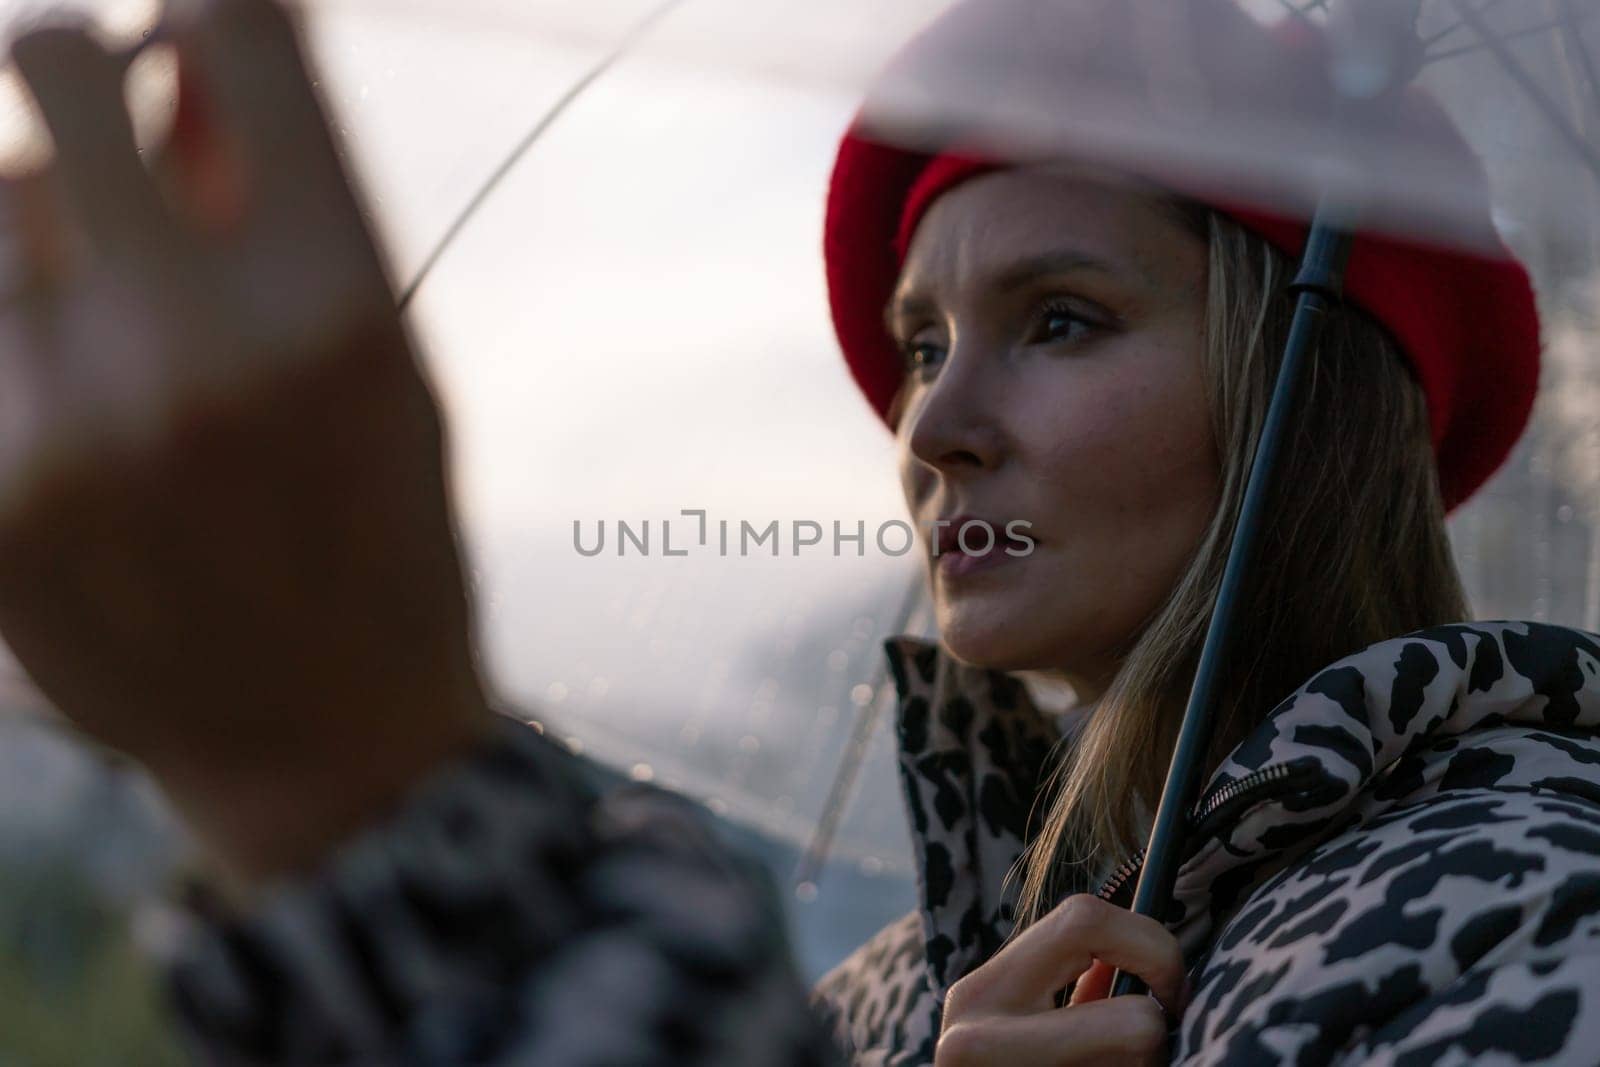 A woman wearing a red hat and a leopard print coat is holding a clear umbrella. The umbrella is open, and the woman is looking up at the sky. The scene has a calm and peaceful mood